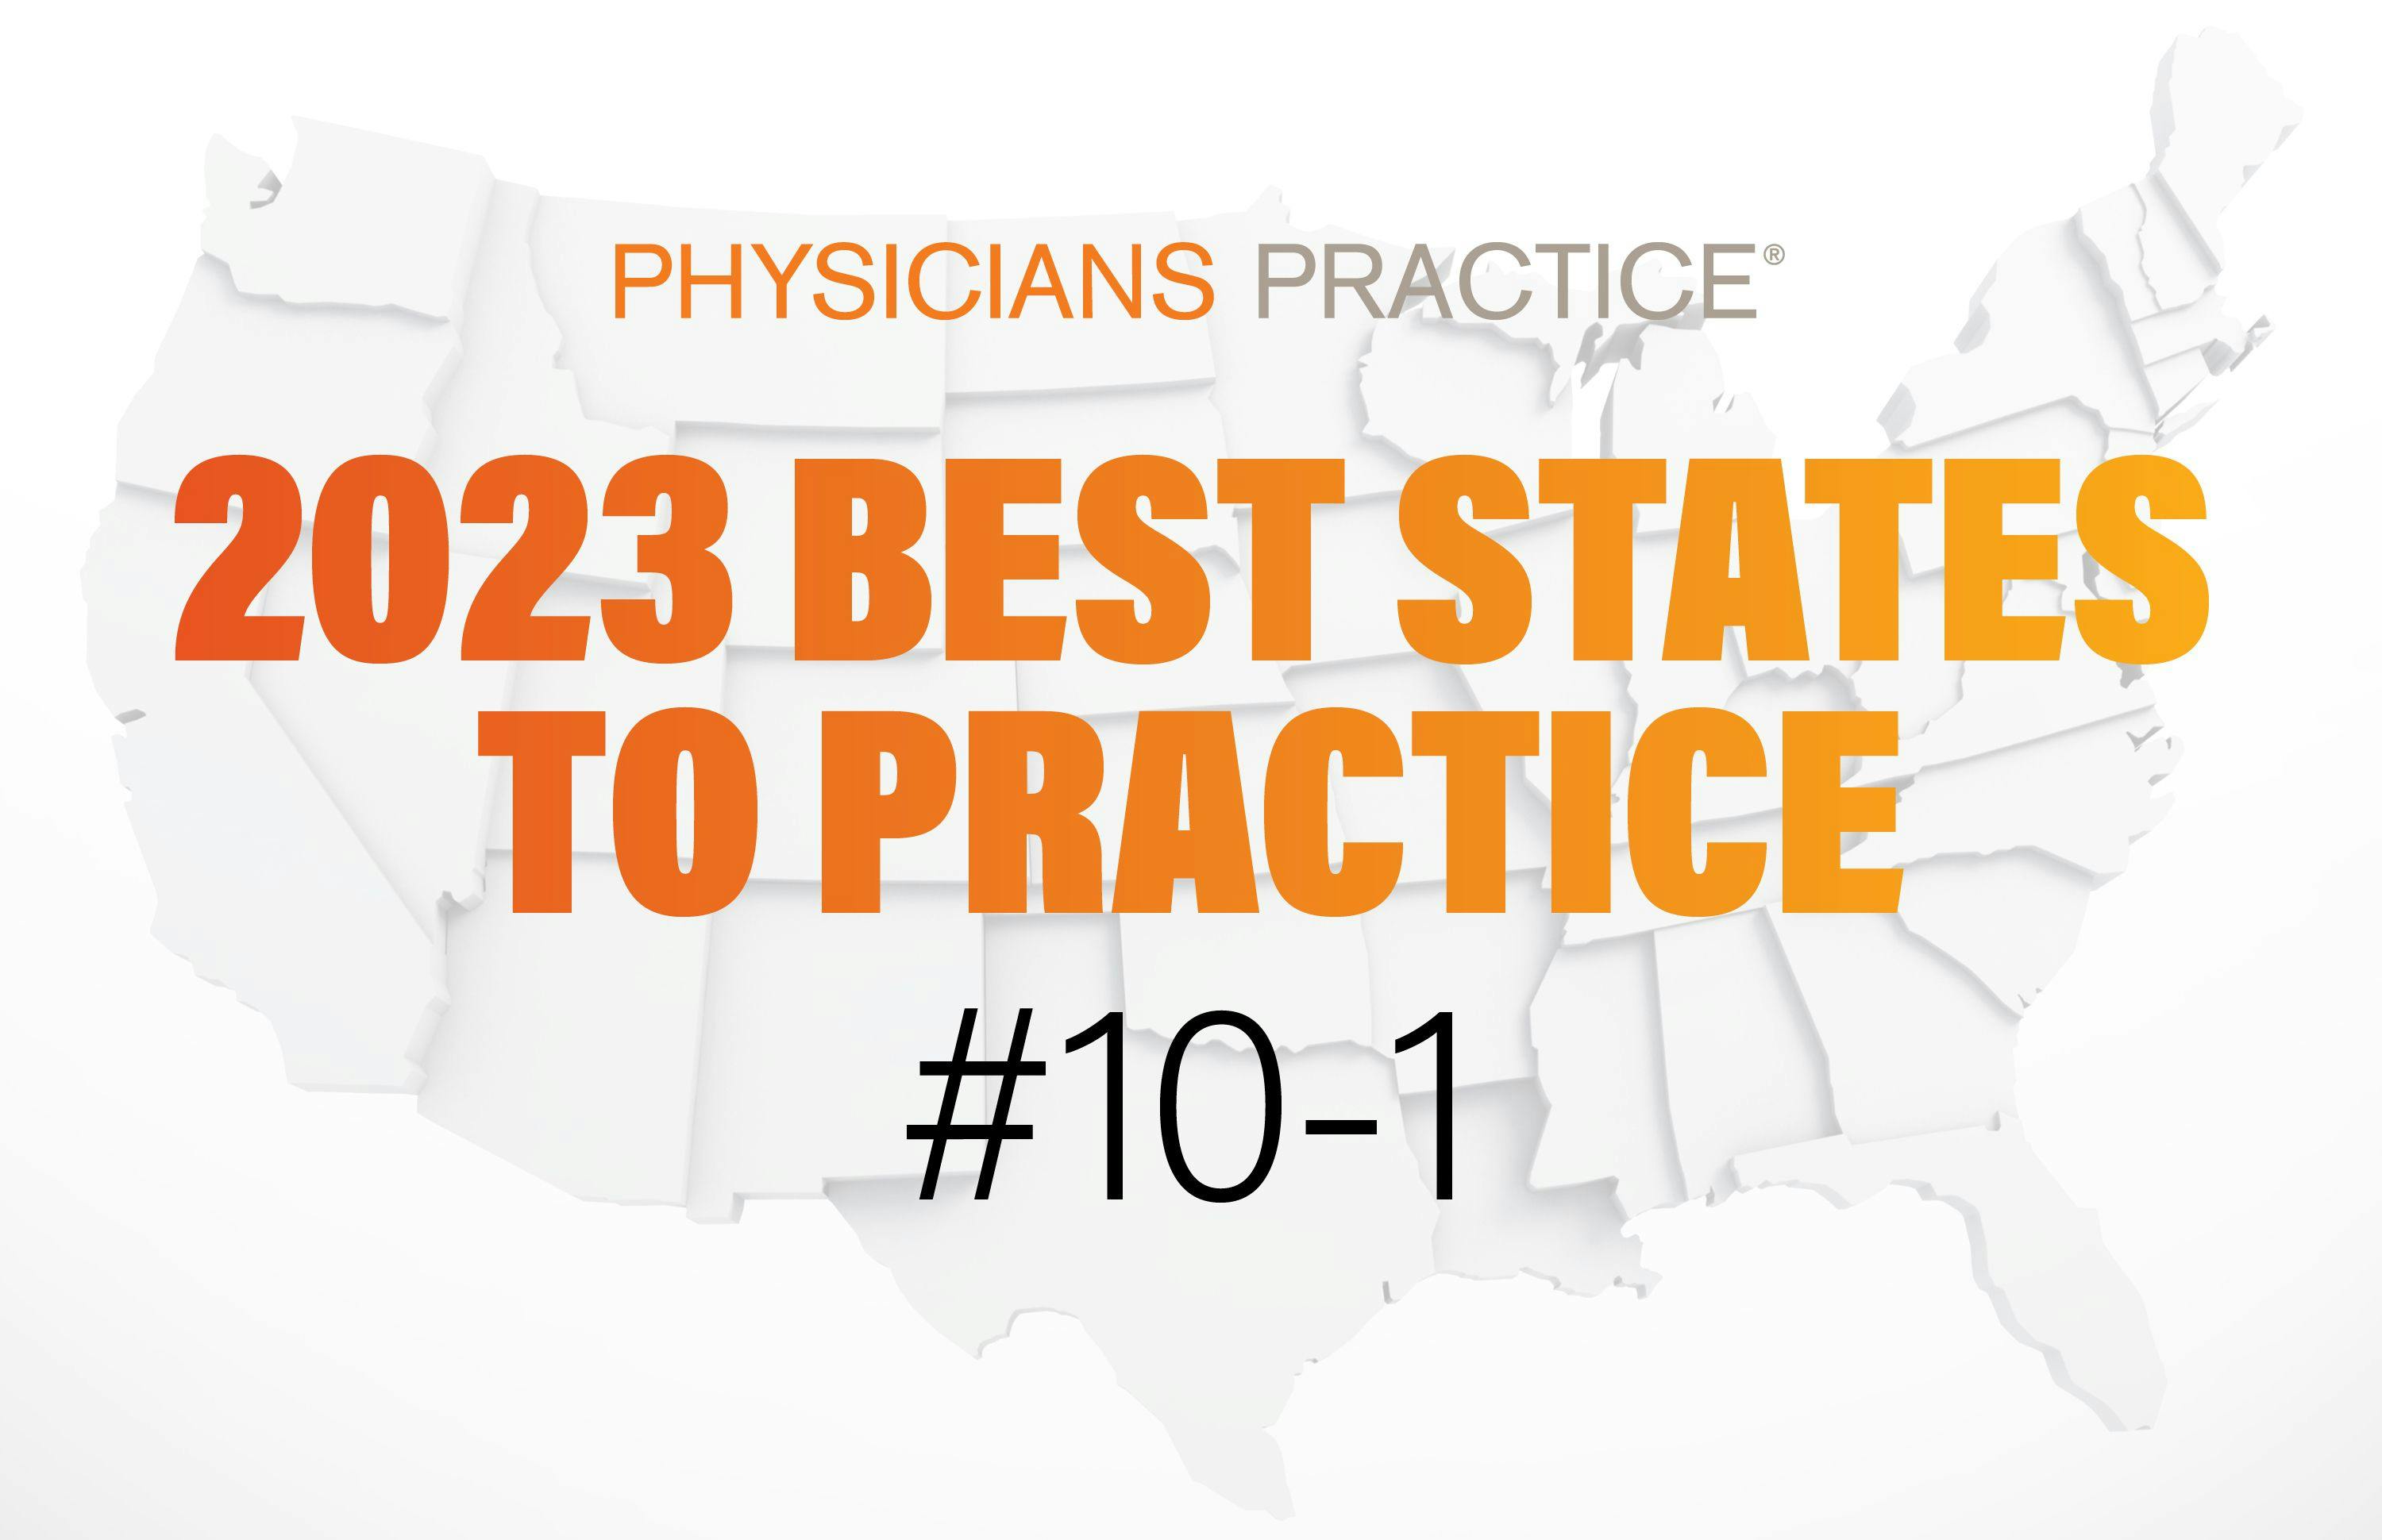 Physicians Practice definitive 10 best states for doctors 2023